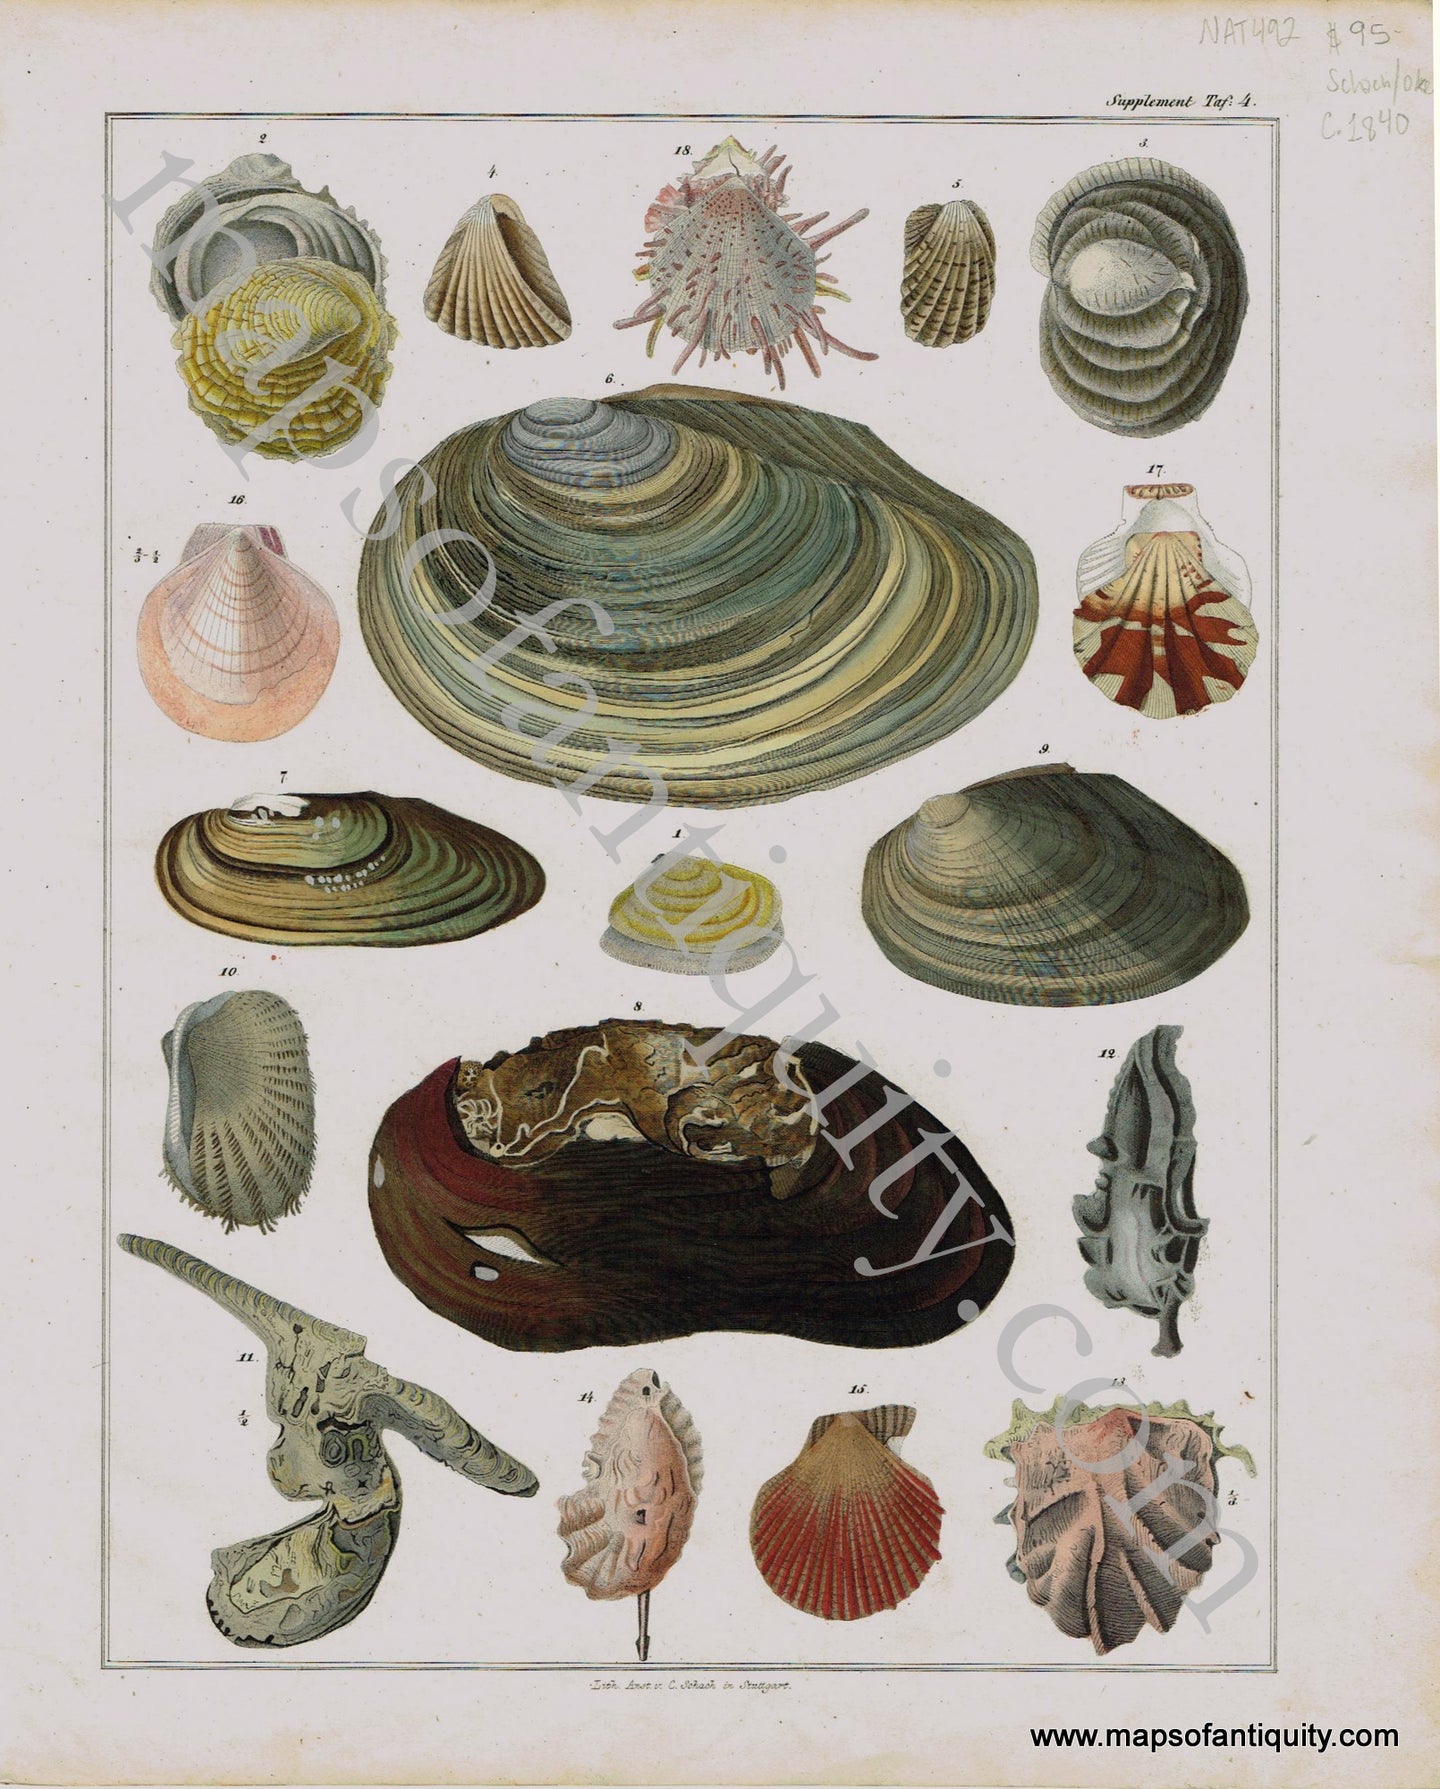 Antique-Print-Prints-Engraved-Engravings-Illustration-Illustrated-Shell-Seashells-Seashell-Sea-Shells-Marine-Aquatic-Life-Natural-History-Schnapper-Oken-Schach-1840s-1800s-Early-Mid-19th-Century-Maps-of-Antiquity